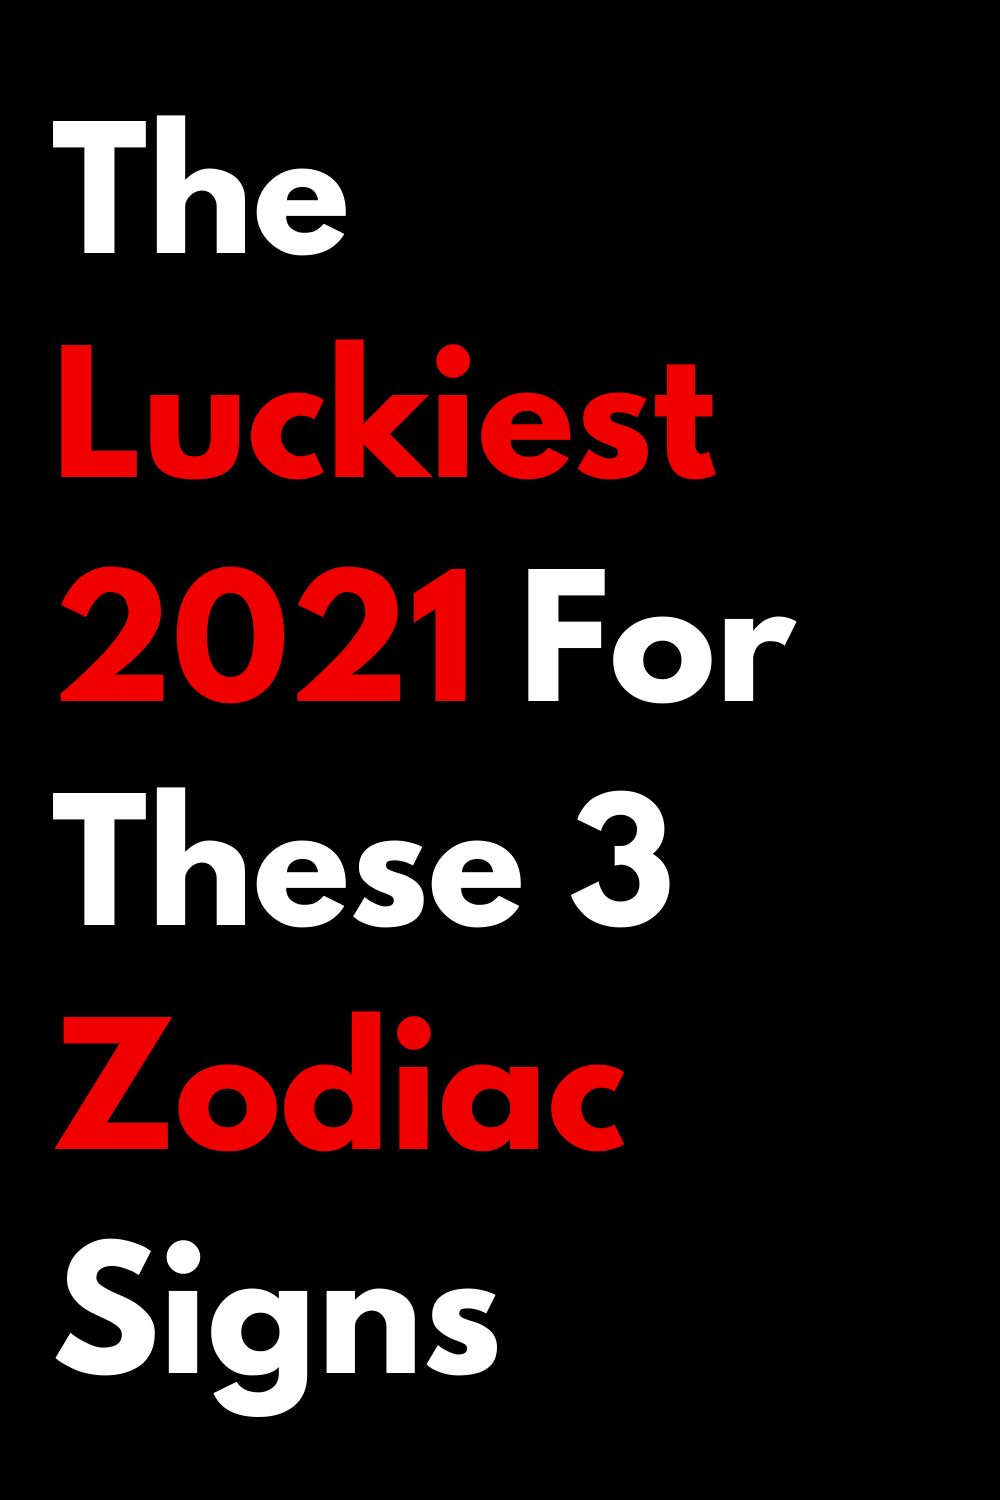 The Luckiest 2021 For These 3 Zodiac Signs